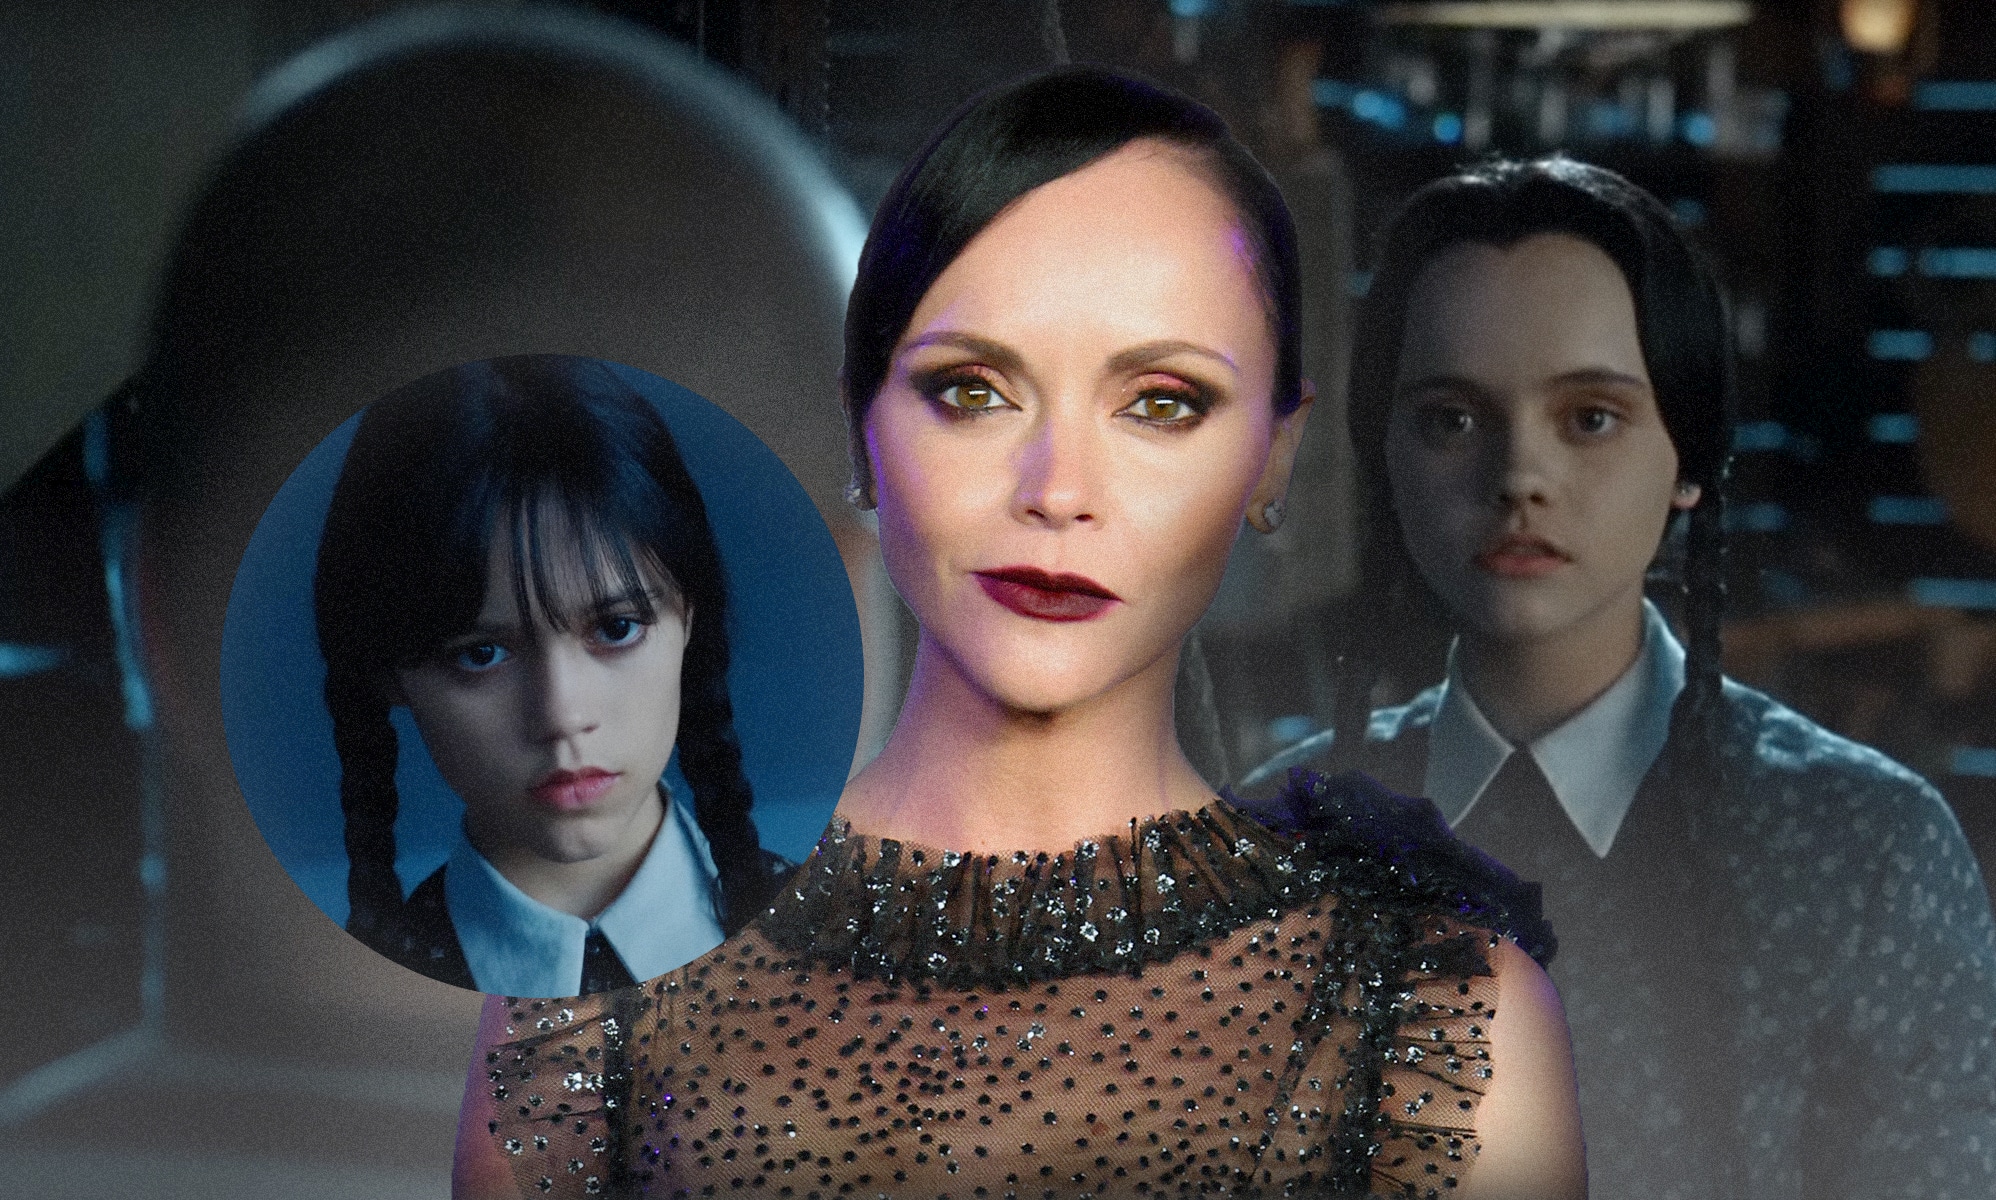 Wednesday Addams is a queer icon, but is she queer?